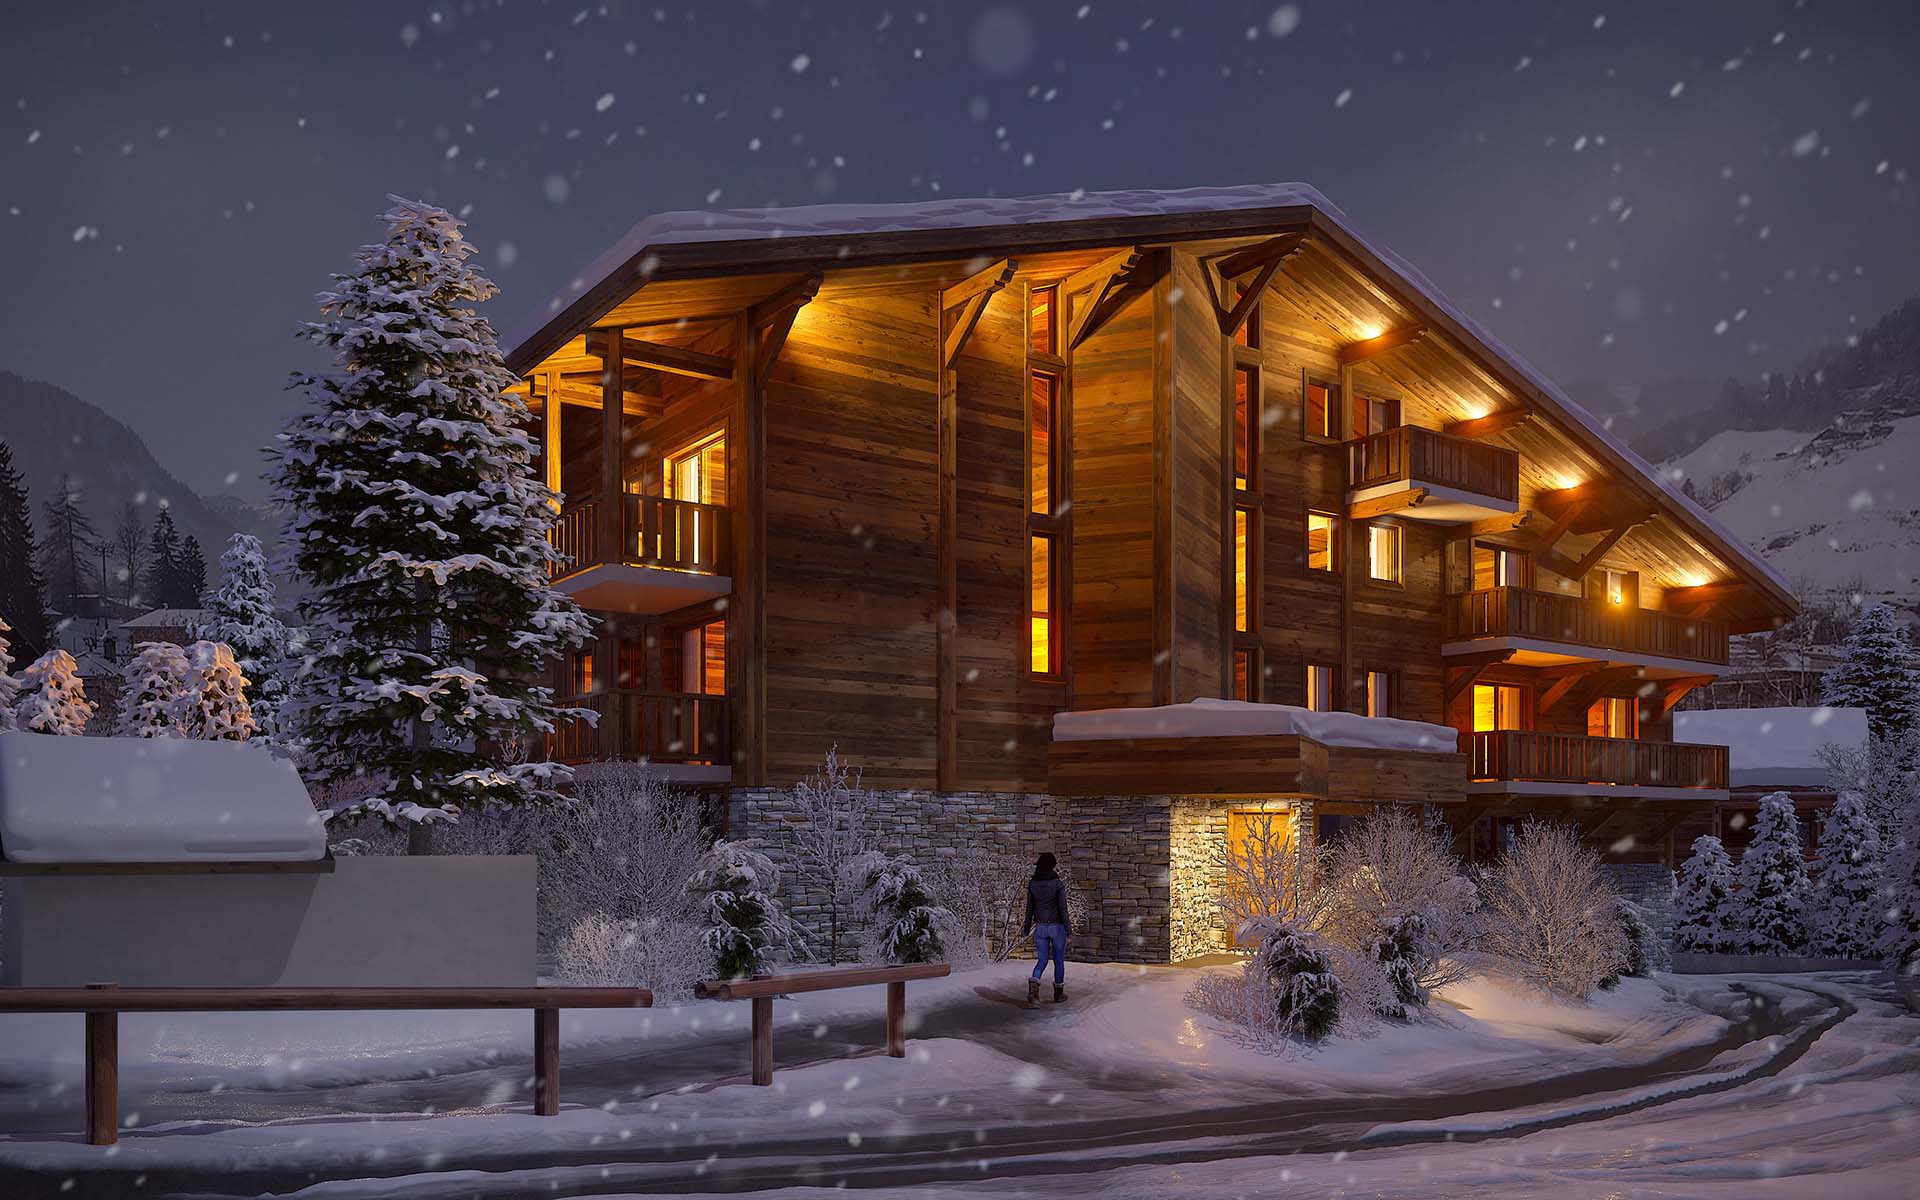 3D Perspective of a luxurious chalet created by the 3D studio Valentin Studio.